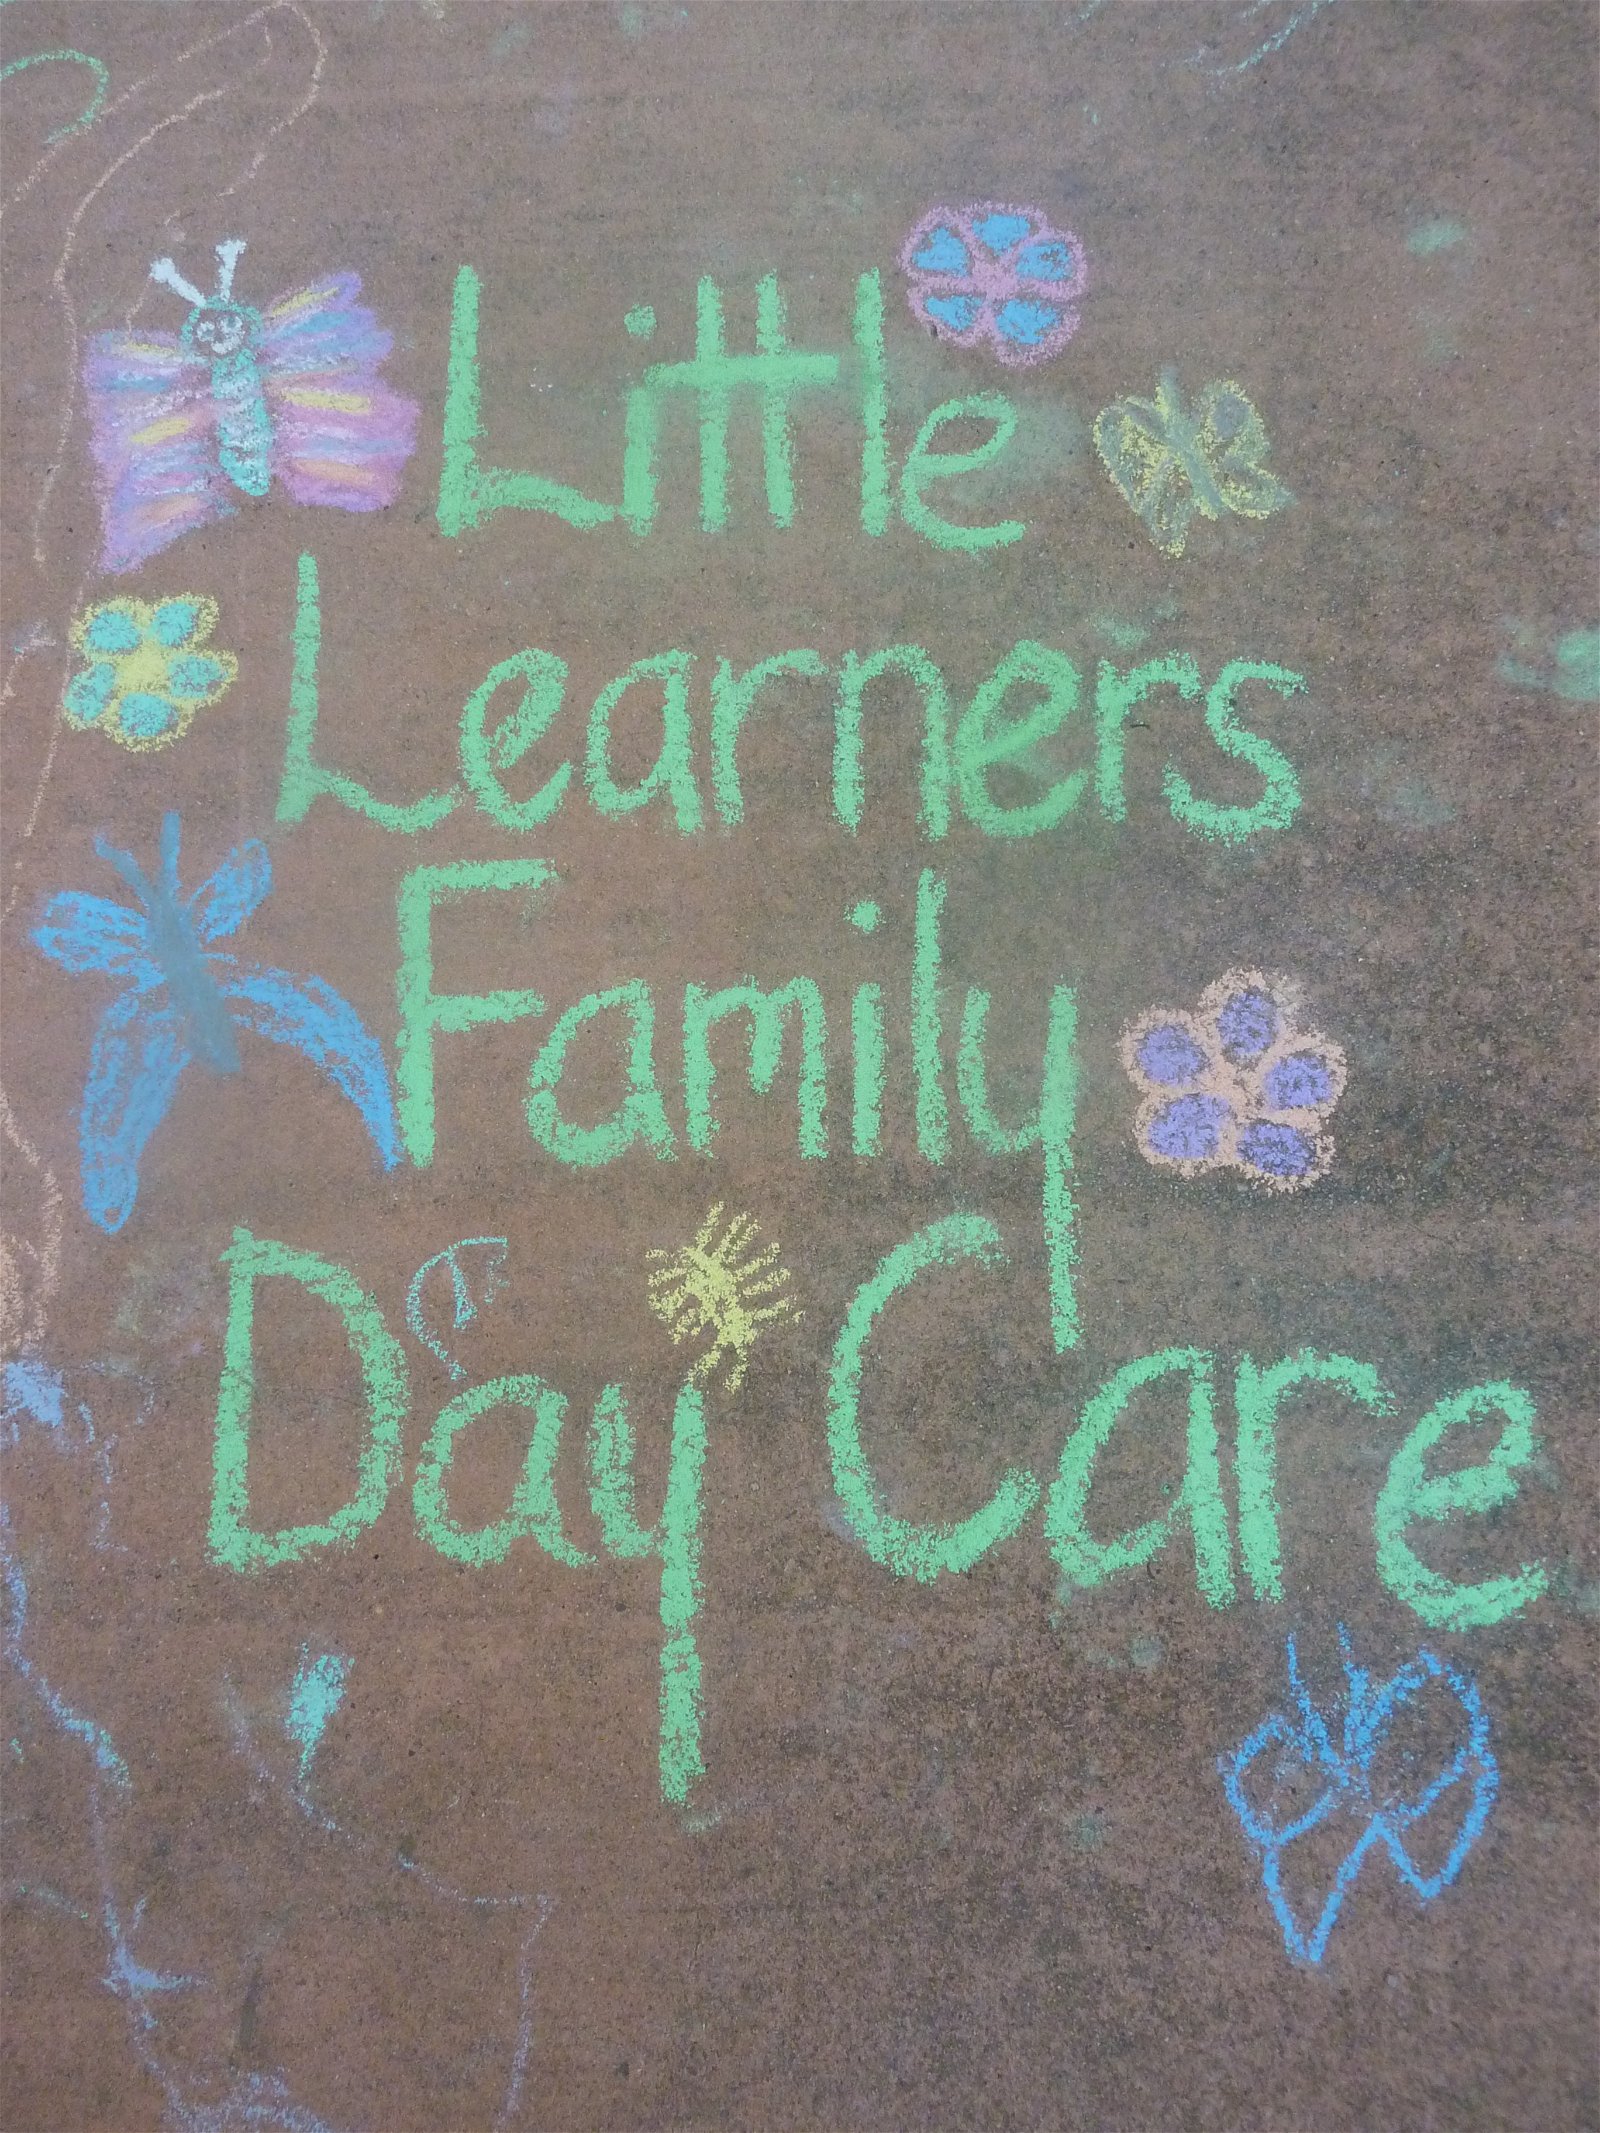 Little Learners Family Day Care - Child Care Find